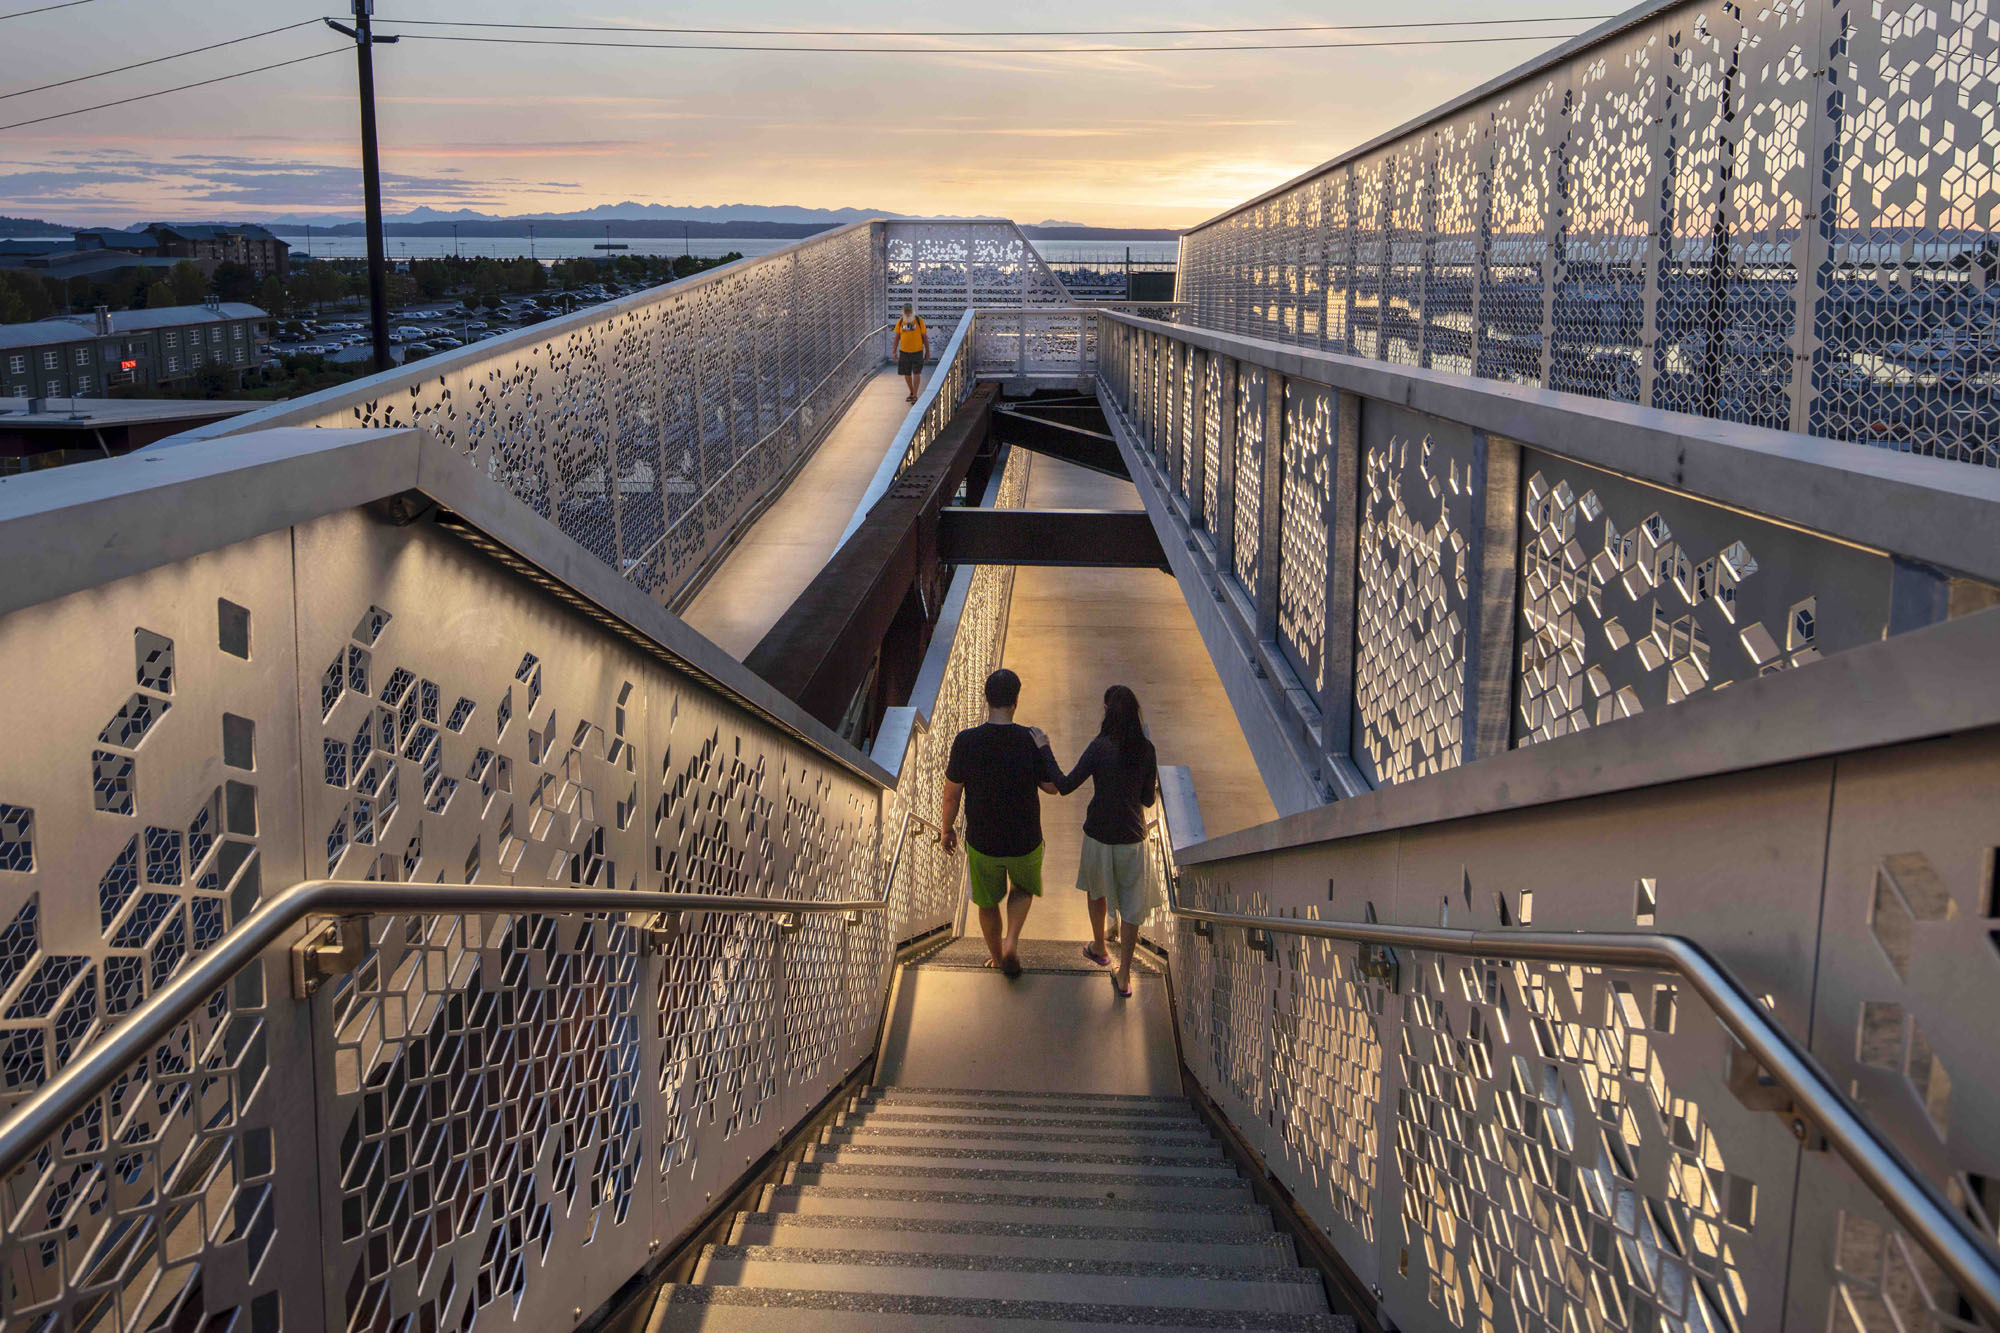 LED strip lights illuminating architectural steel and pathways on a pedestrian bridge. Boca Lighting and Controls